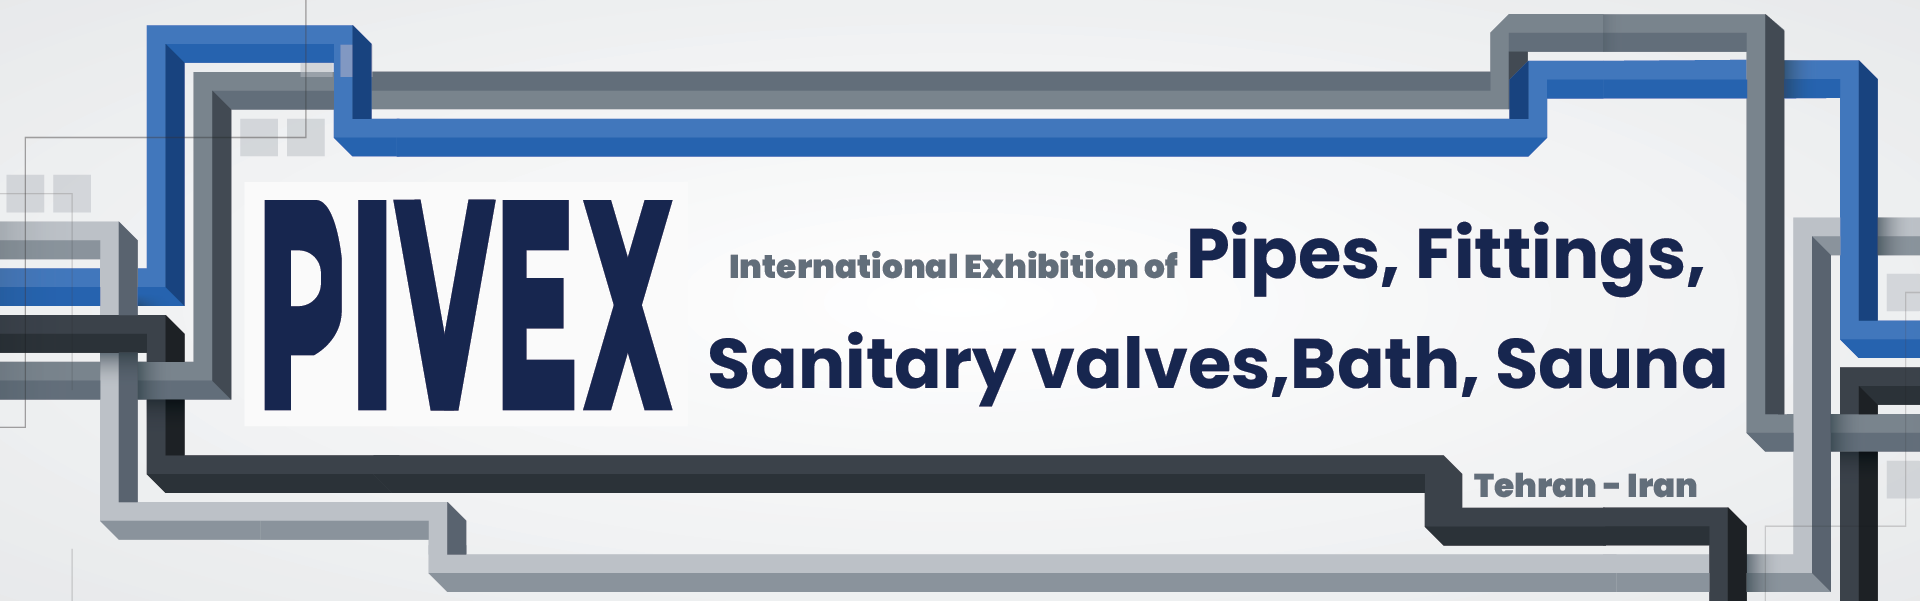 Iran sanitary pipes and fittings exhibition (PIVEX)